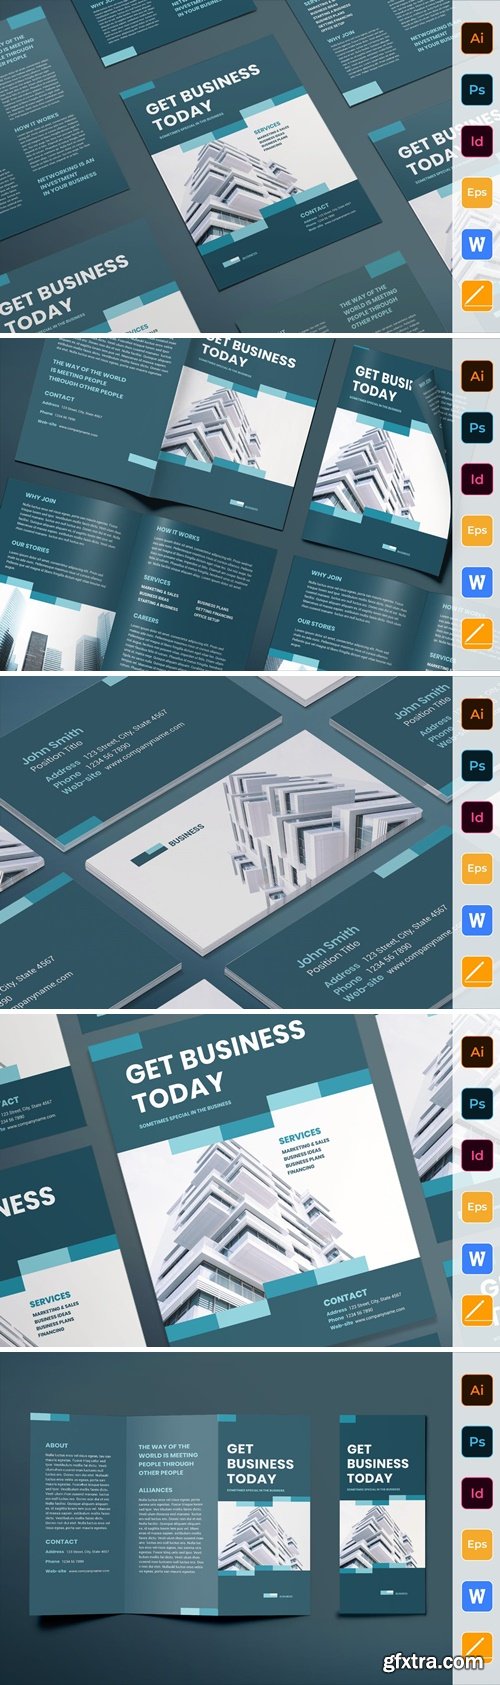 Business Networking Bundle Pack